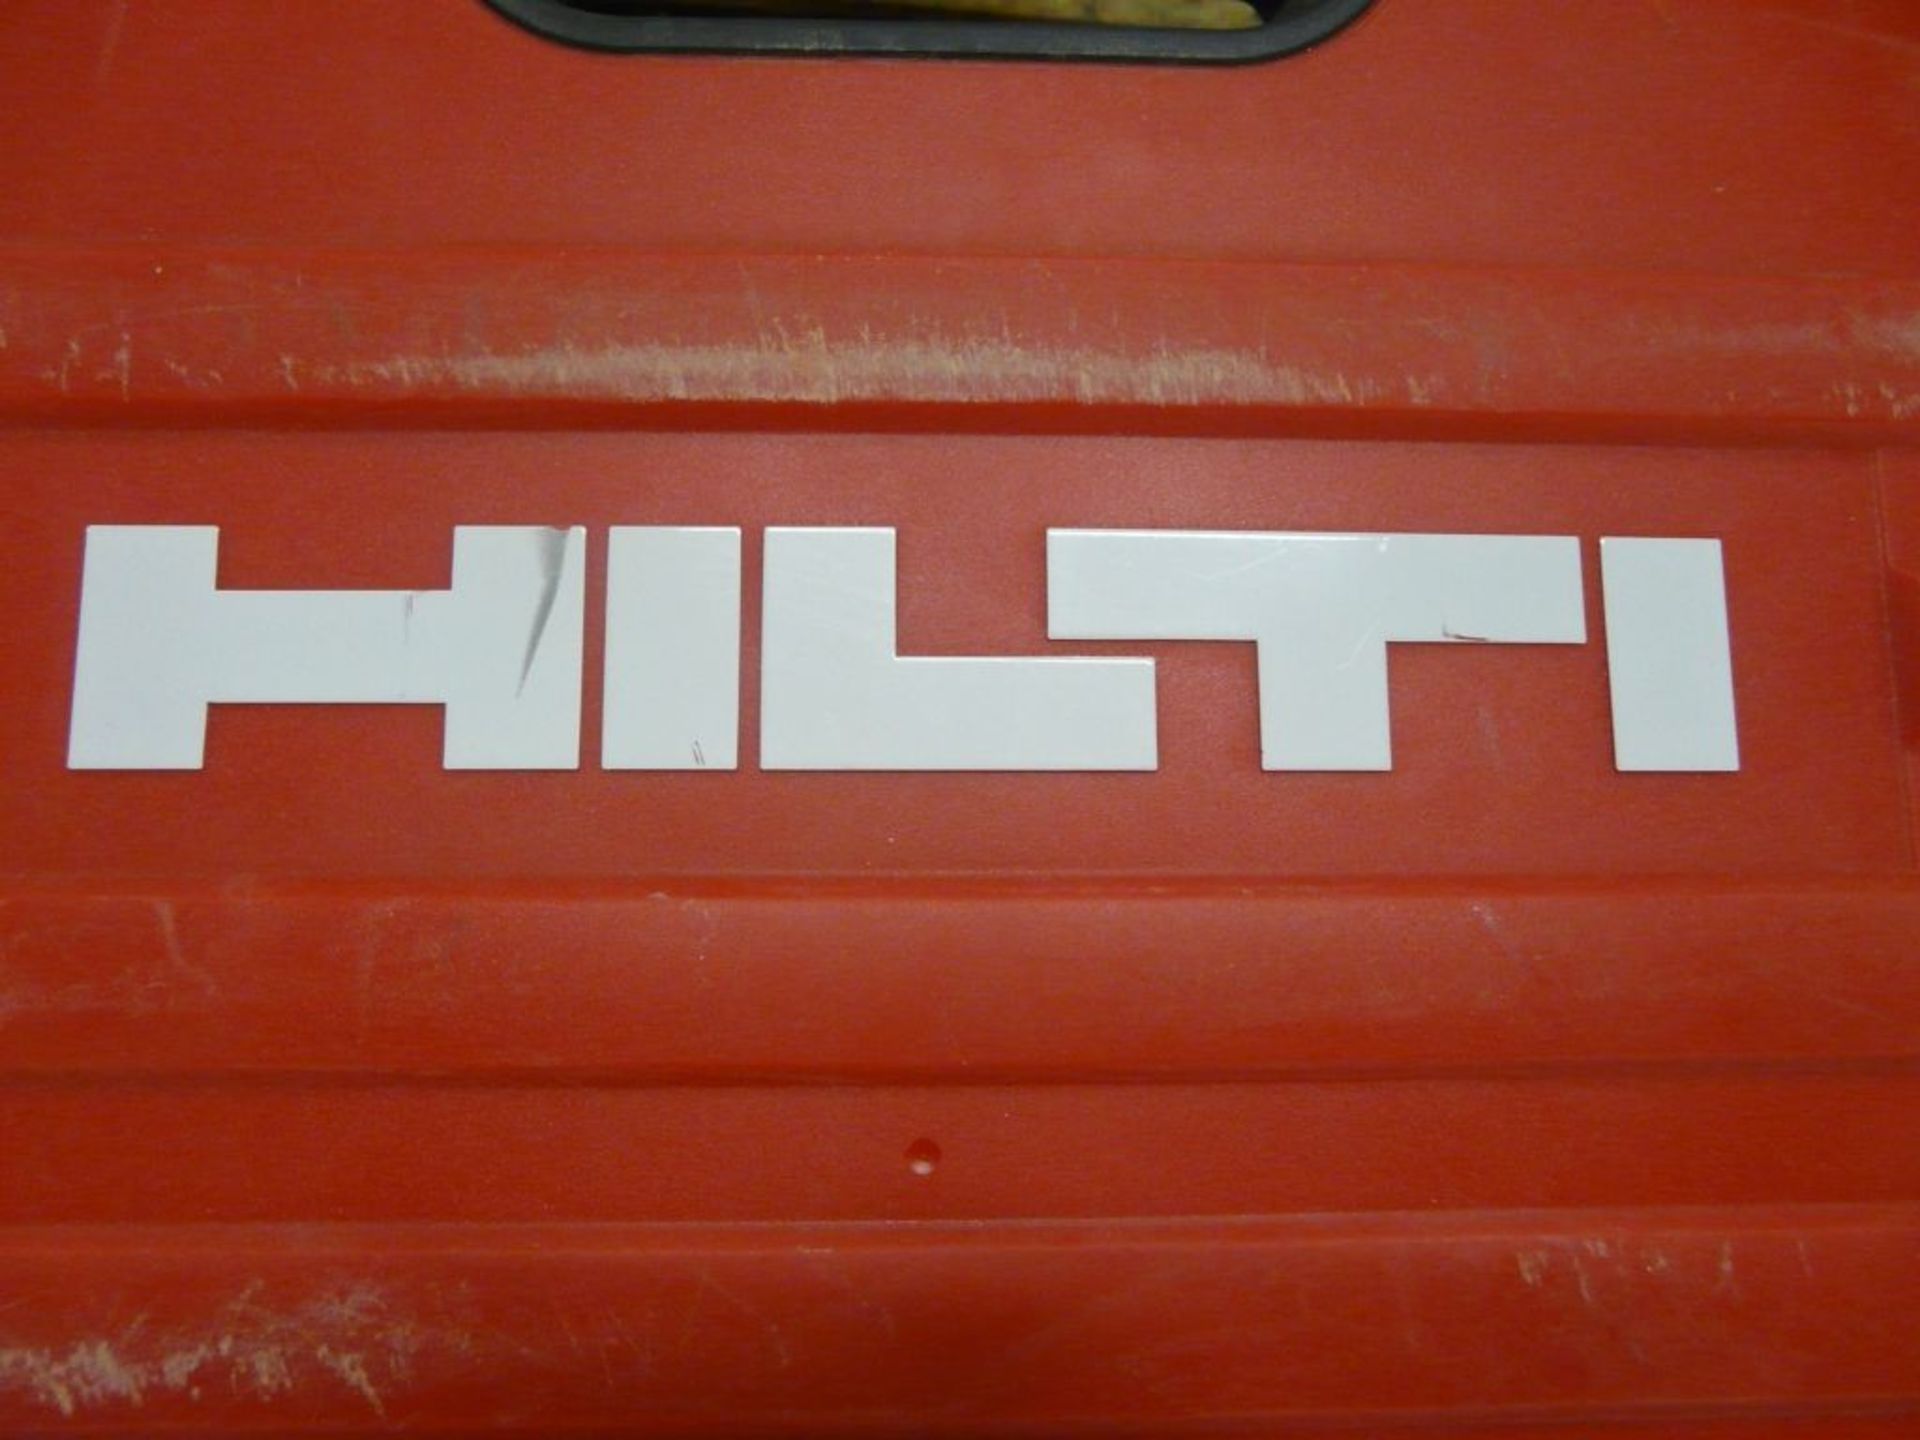 Lot of (4) Hilti Components|(2) Staubmoduls Model No. TEDRS-B, Part No. 365944; (2) Dust Removal - Image 4 of 6